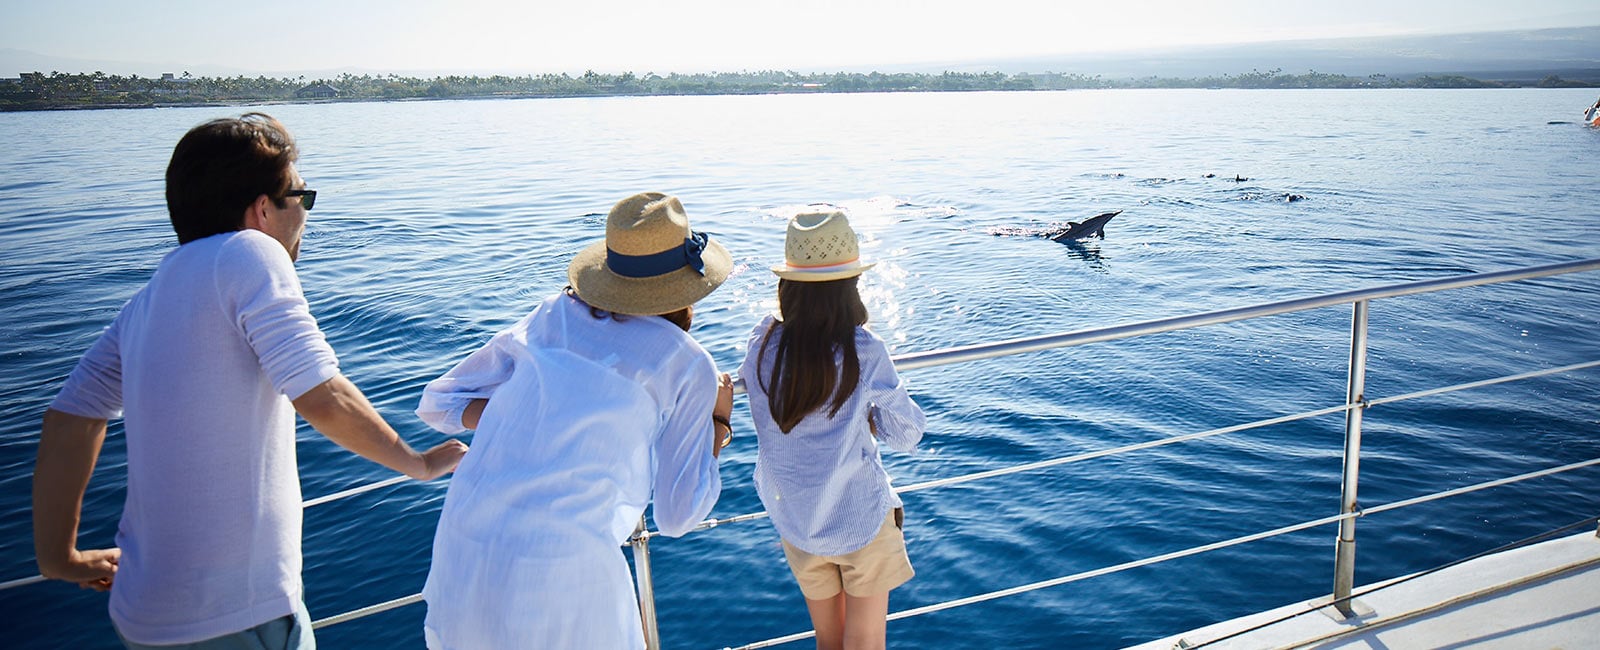 Enjoy whale watching on a Hawaiian vacation with Hilton Grand Vacations